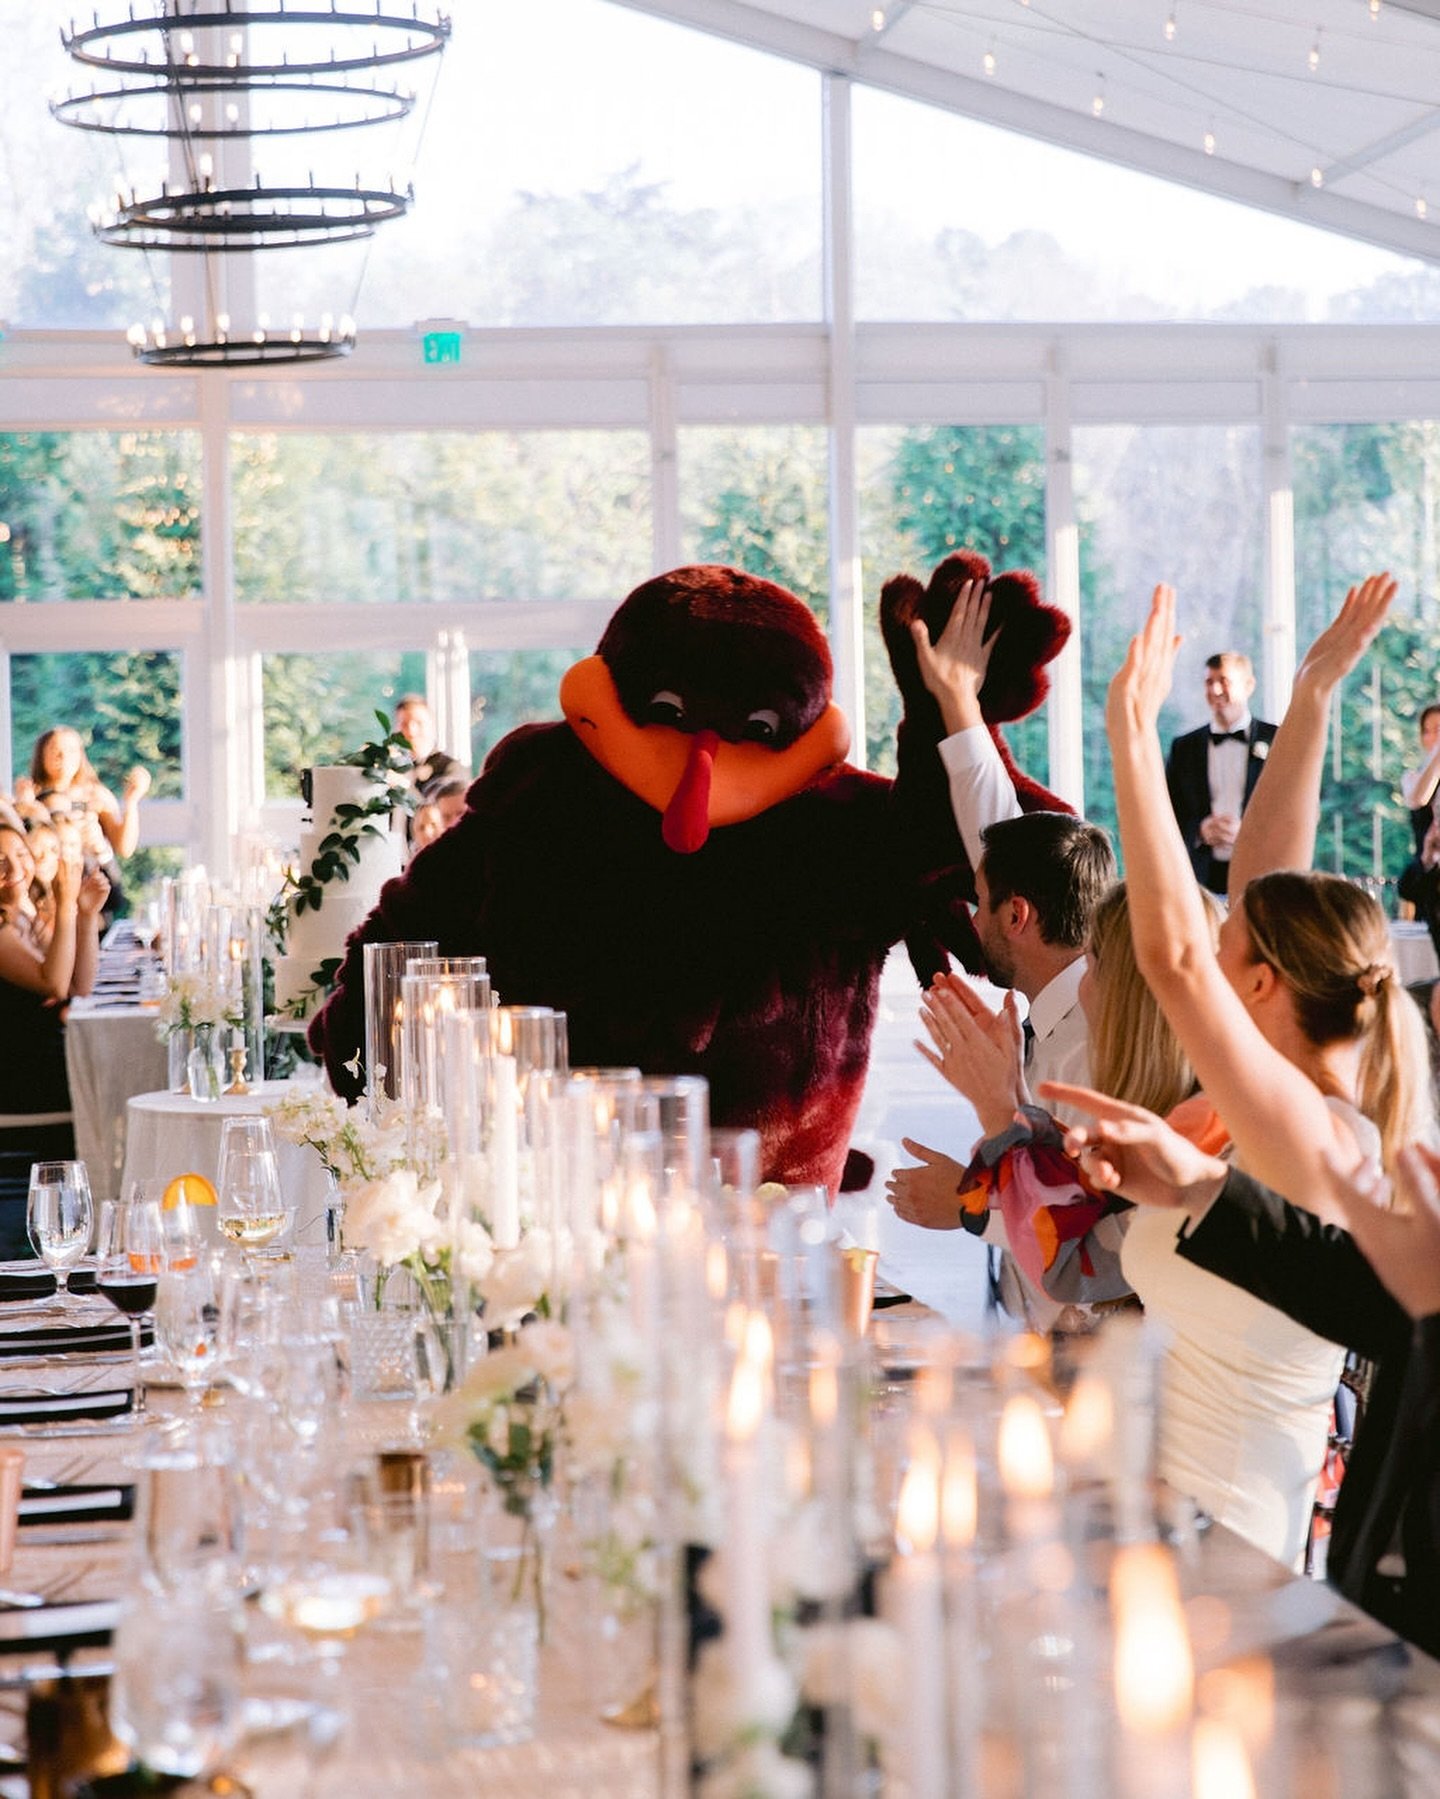 When your school mascot serves as the ultimate hype-up for your reception entrance 🦃 

The official @thehokiebird got wedding guests to their feet to welcome T + S into the @dover_hall glass hall for their first dance. 

Gotta love a #hokie wedding!